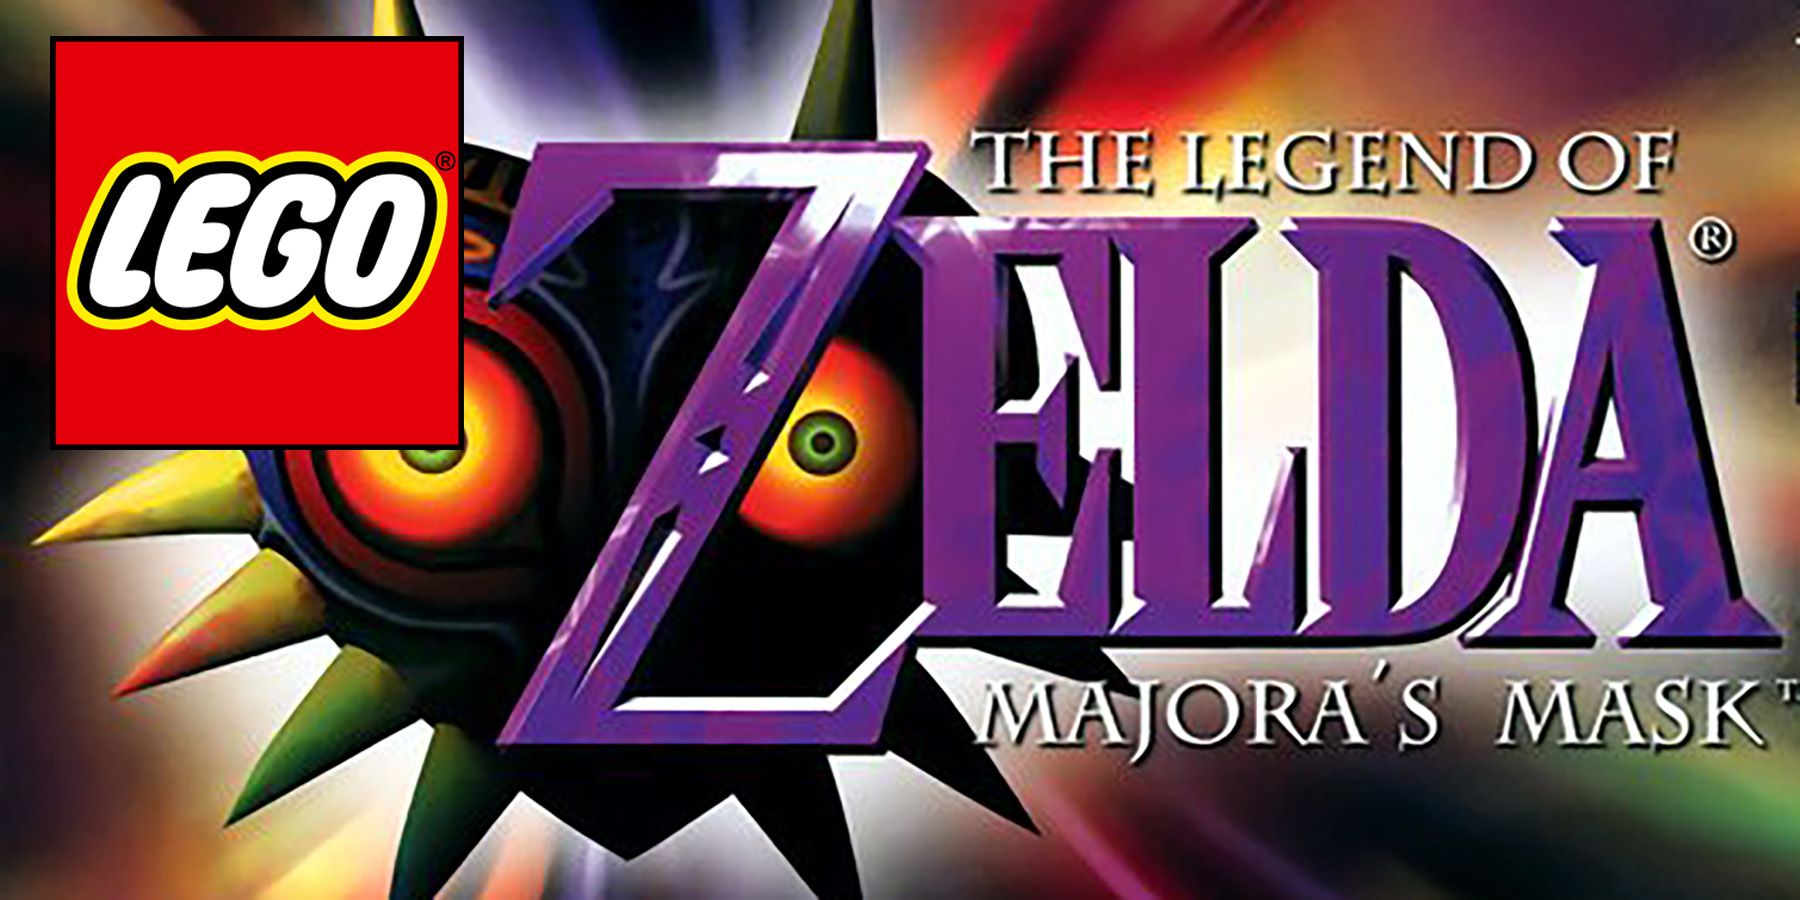 majora's mask box art with the lego logo in the top left corner